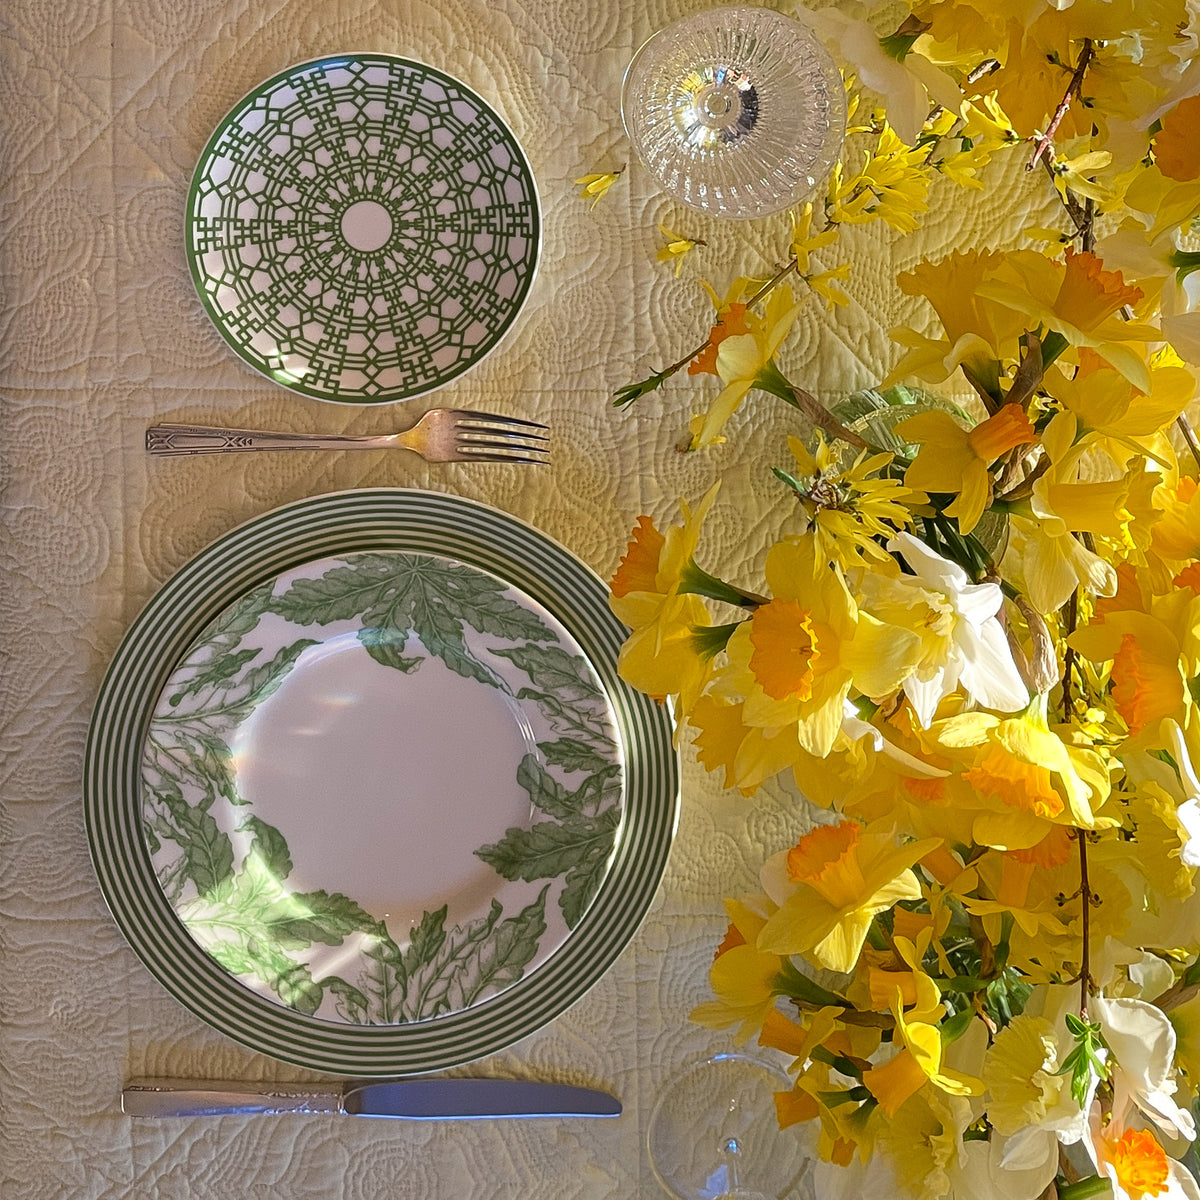 A table setting with green and white patterned high-fired Caskata Artisanal Home Newport Stripe Verde Rimmed Dinner Plates, silverware, and a glass placed next to a bouquet of yellow flowers on a yellow quilted tablecloth.